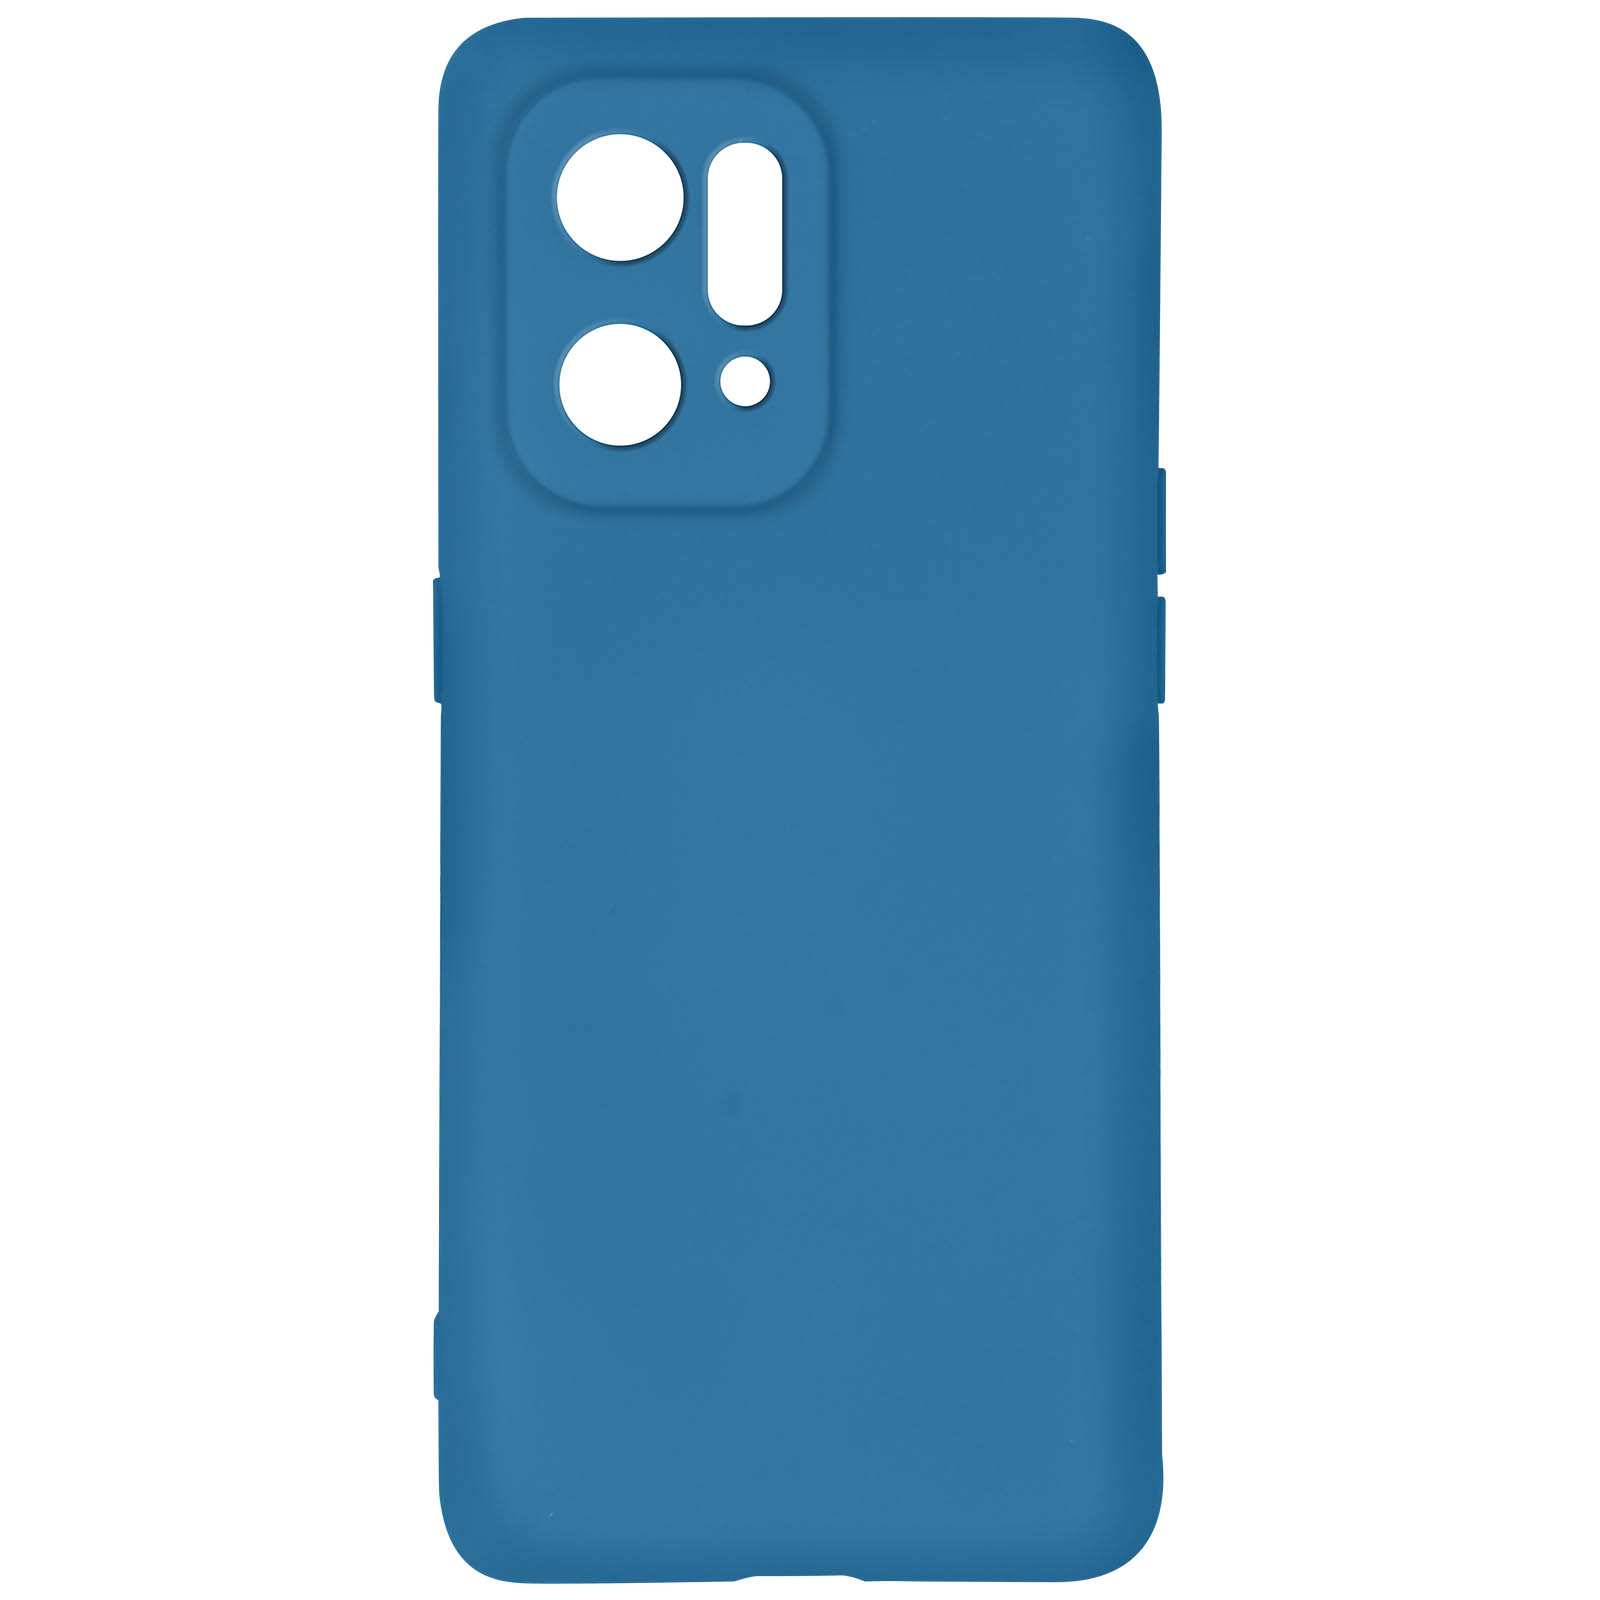 Touch Handyhülle Soft Oppo AVIZAR Find Backcover, X5, Blau Oppo, Series,